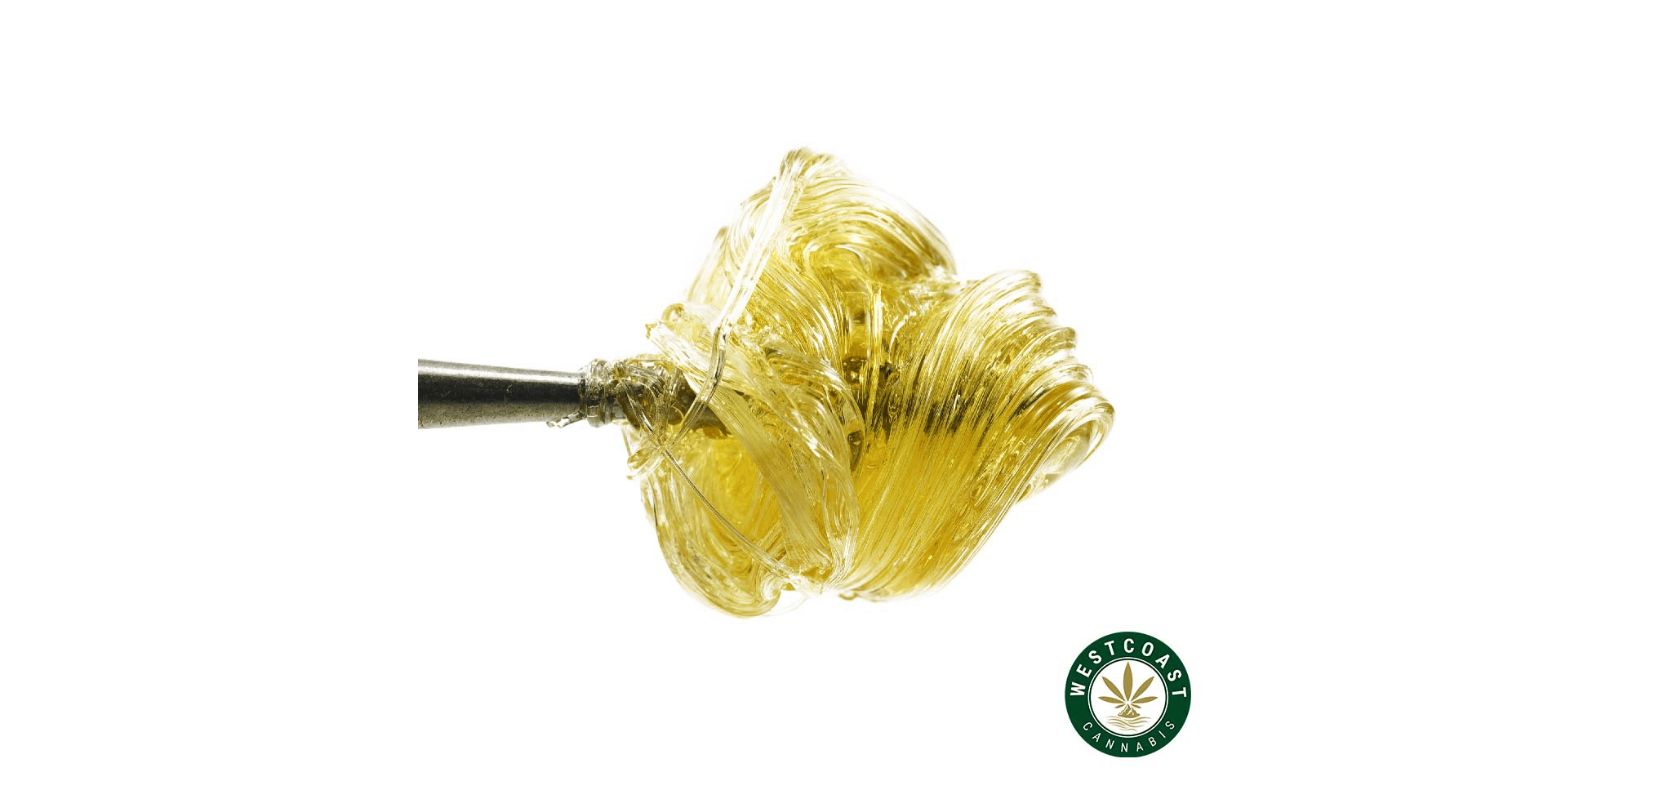 The Premium Pure Distillate – Delta-9 is the most luxurious product you'll find at BC cannabis stores. 